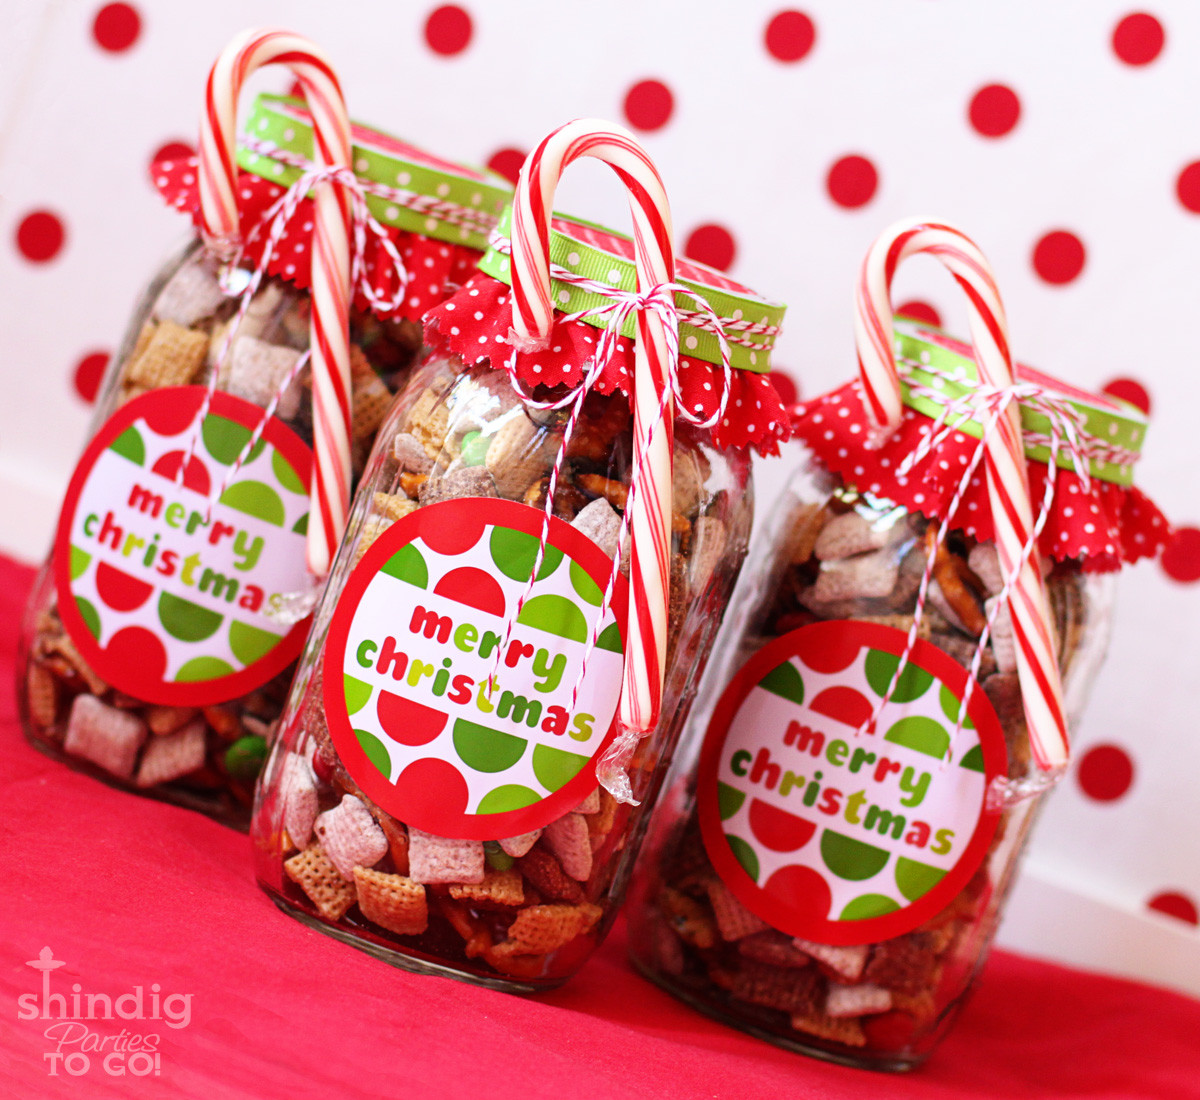 Christmas Candy Gift Baskets
 How To Make Handmade Chex Mix Holiday Gifts & Bonus Free